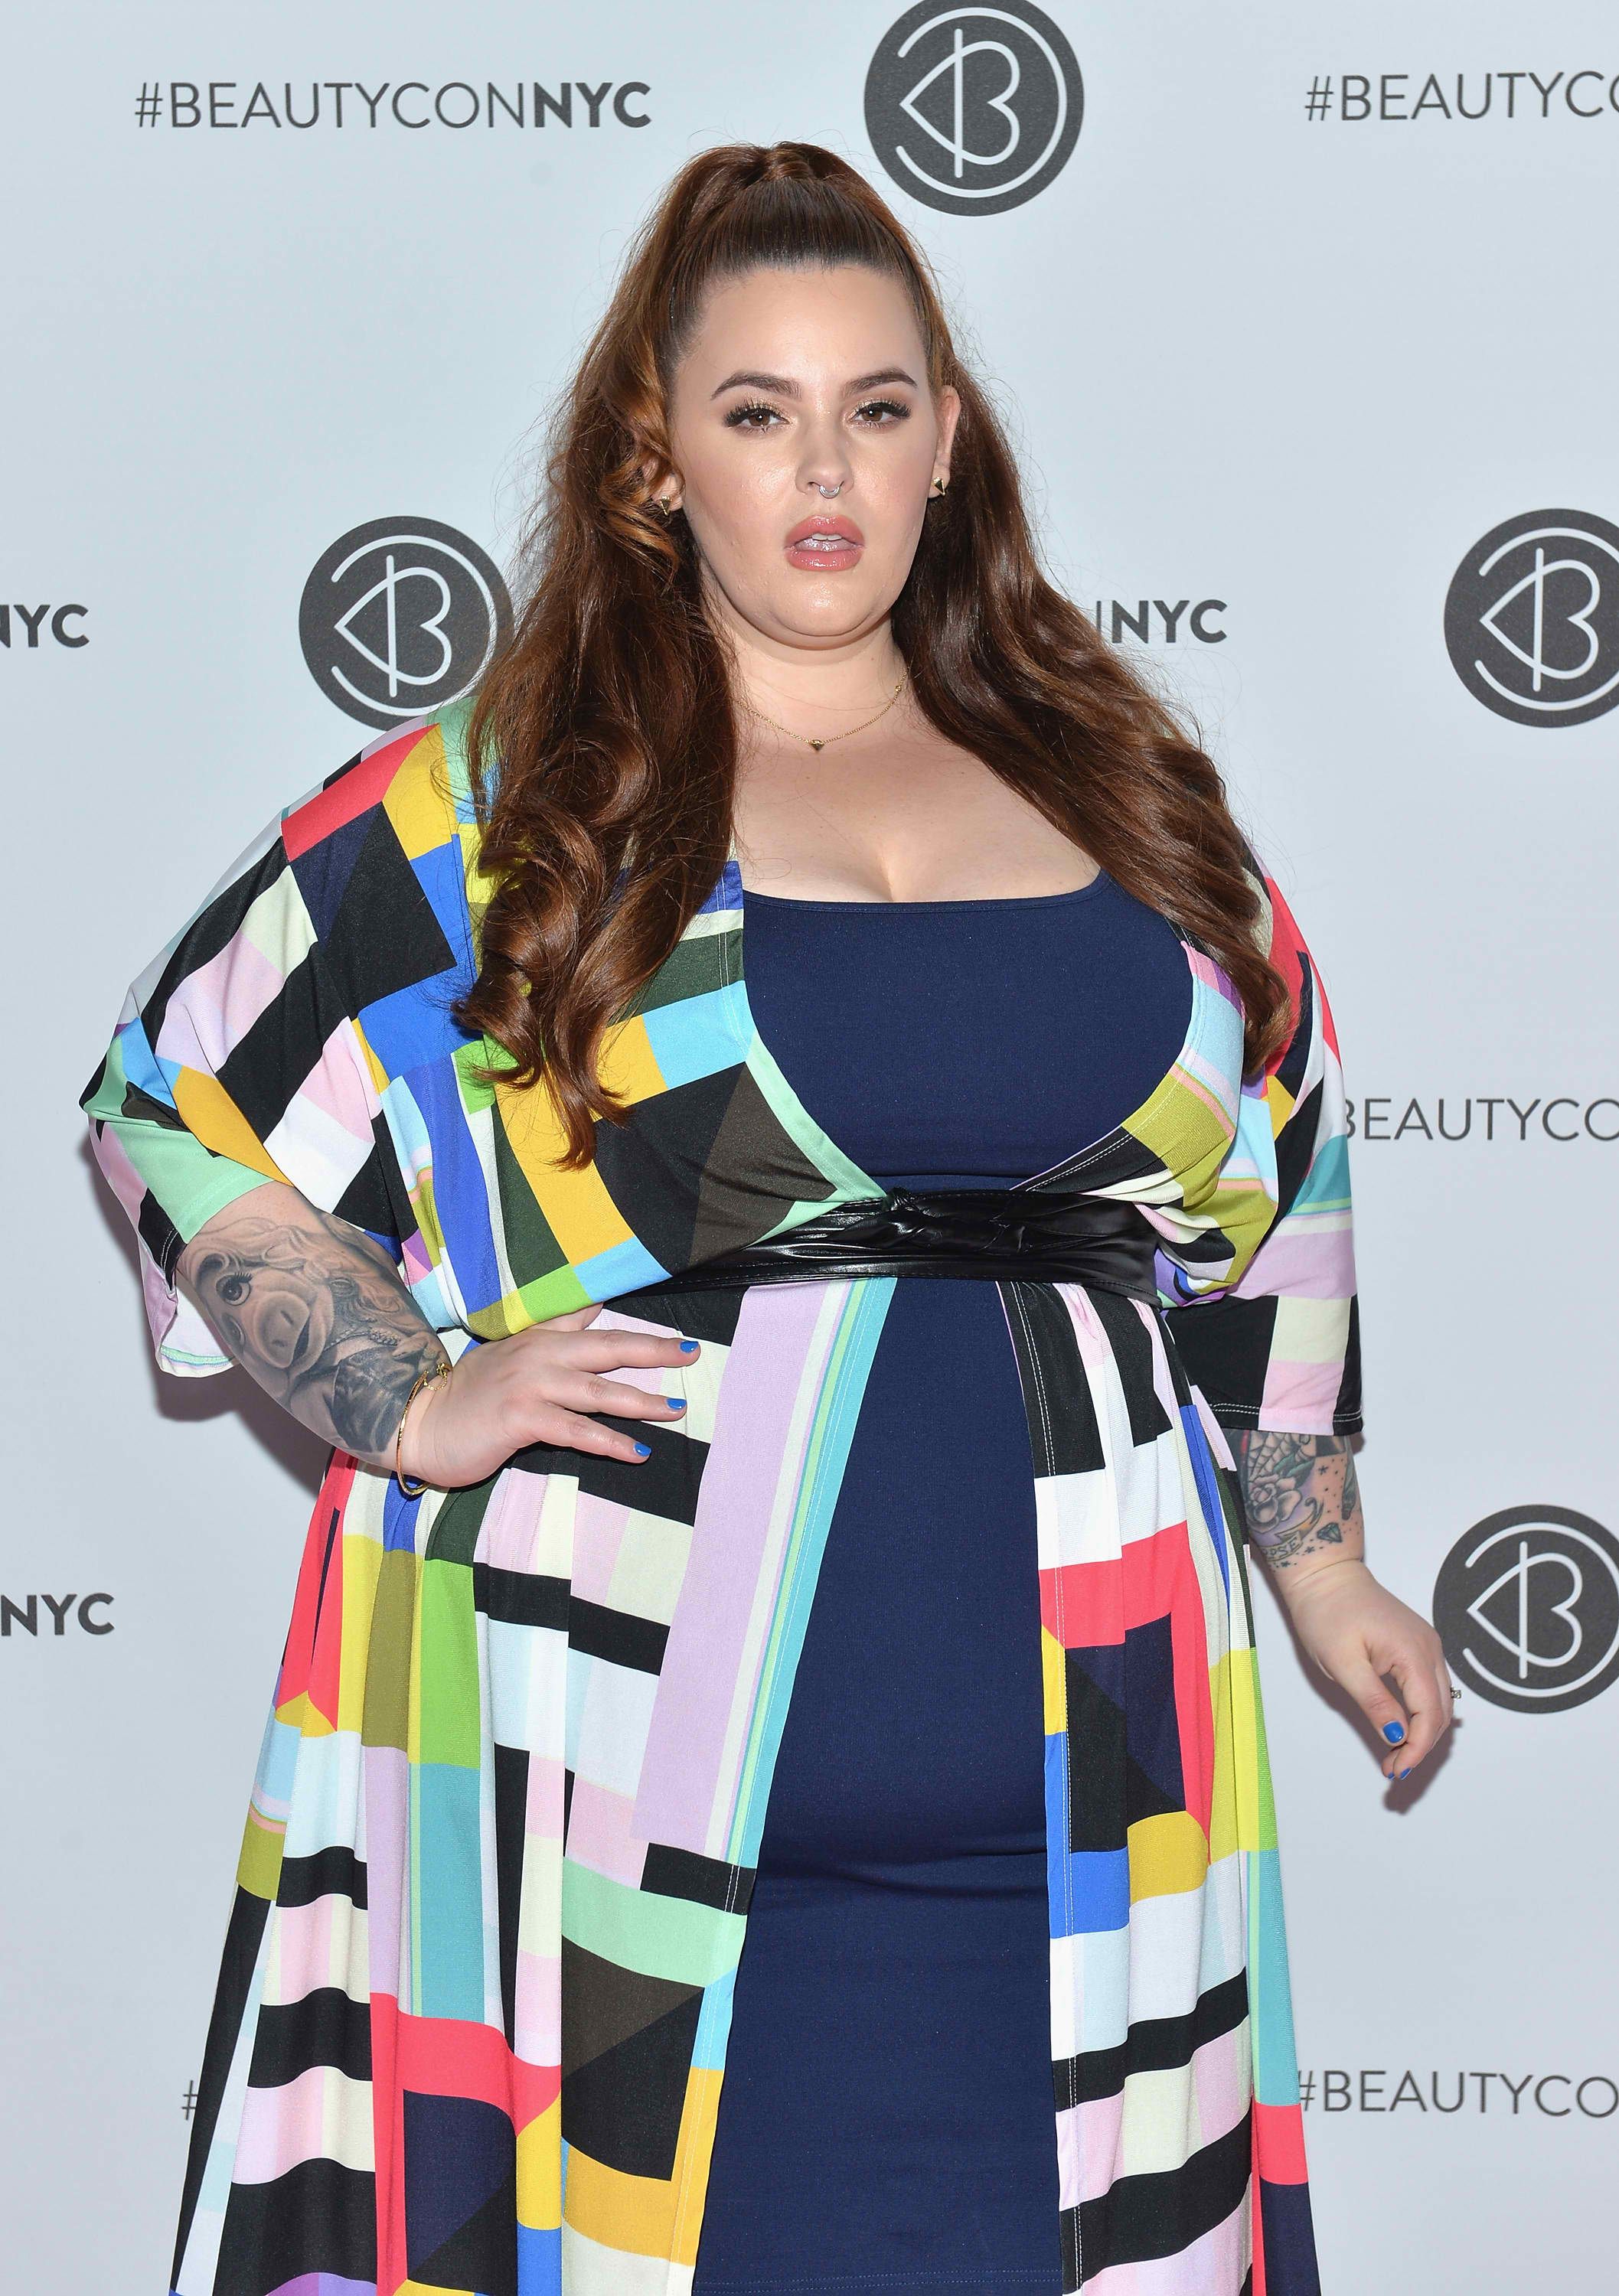 Plus Size Model Tess Holliday Slams Robbie Tripps Viral Post About